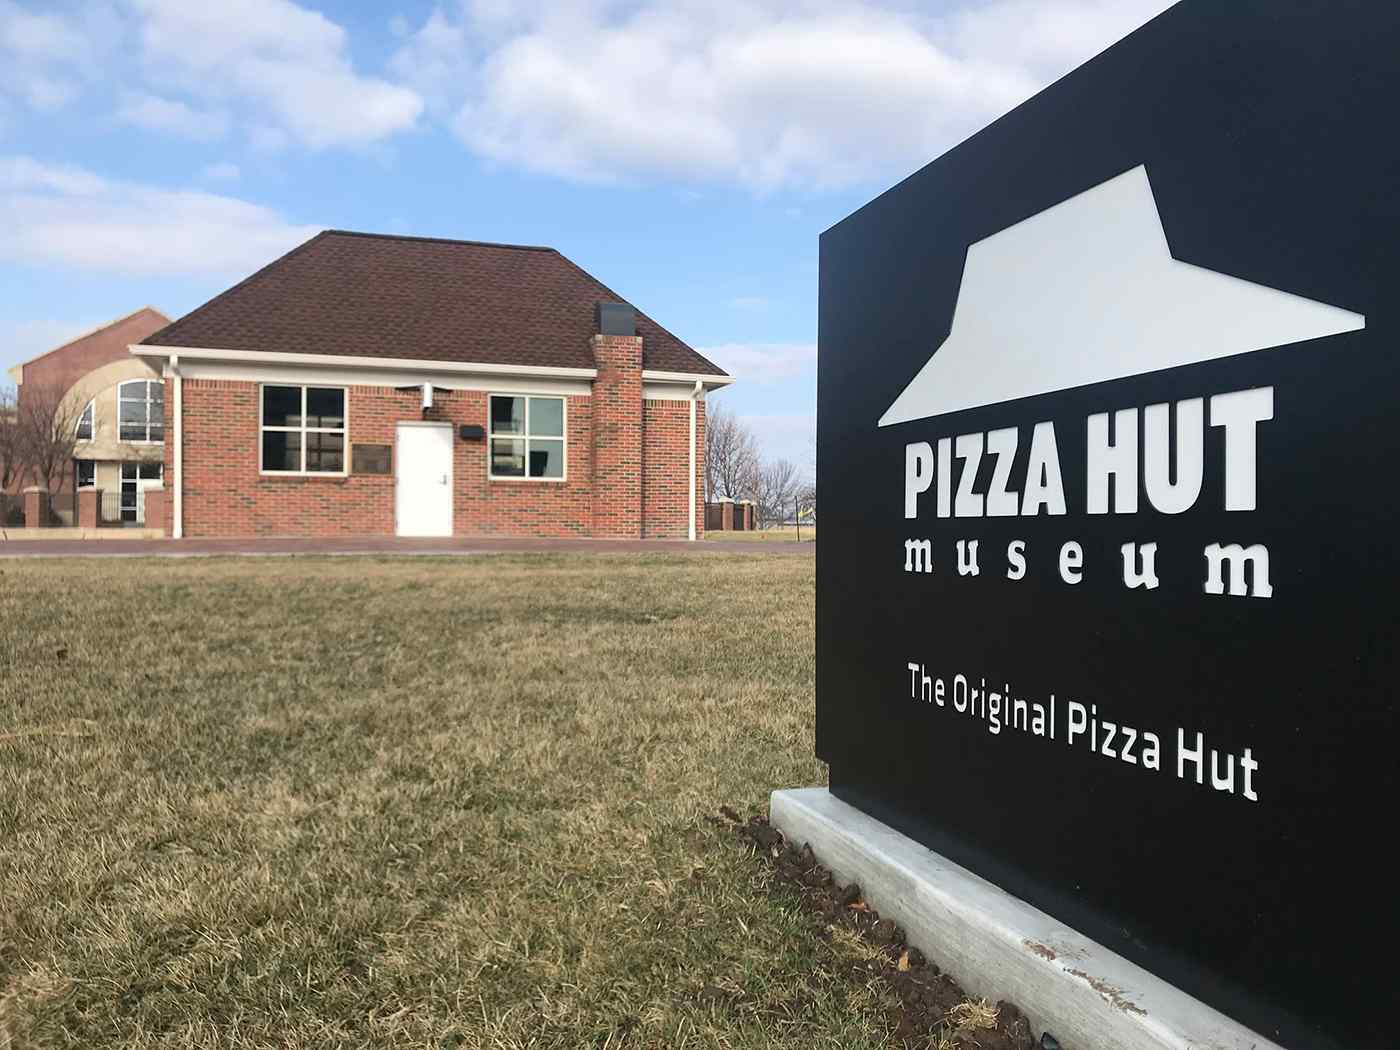 The original Pizza Hut was founded in 1958 by two Wichita State students, brothers Dan and Frank Carney.